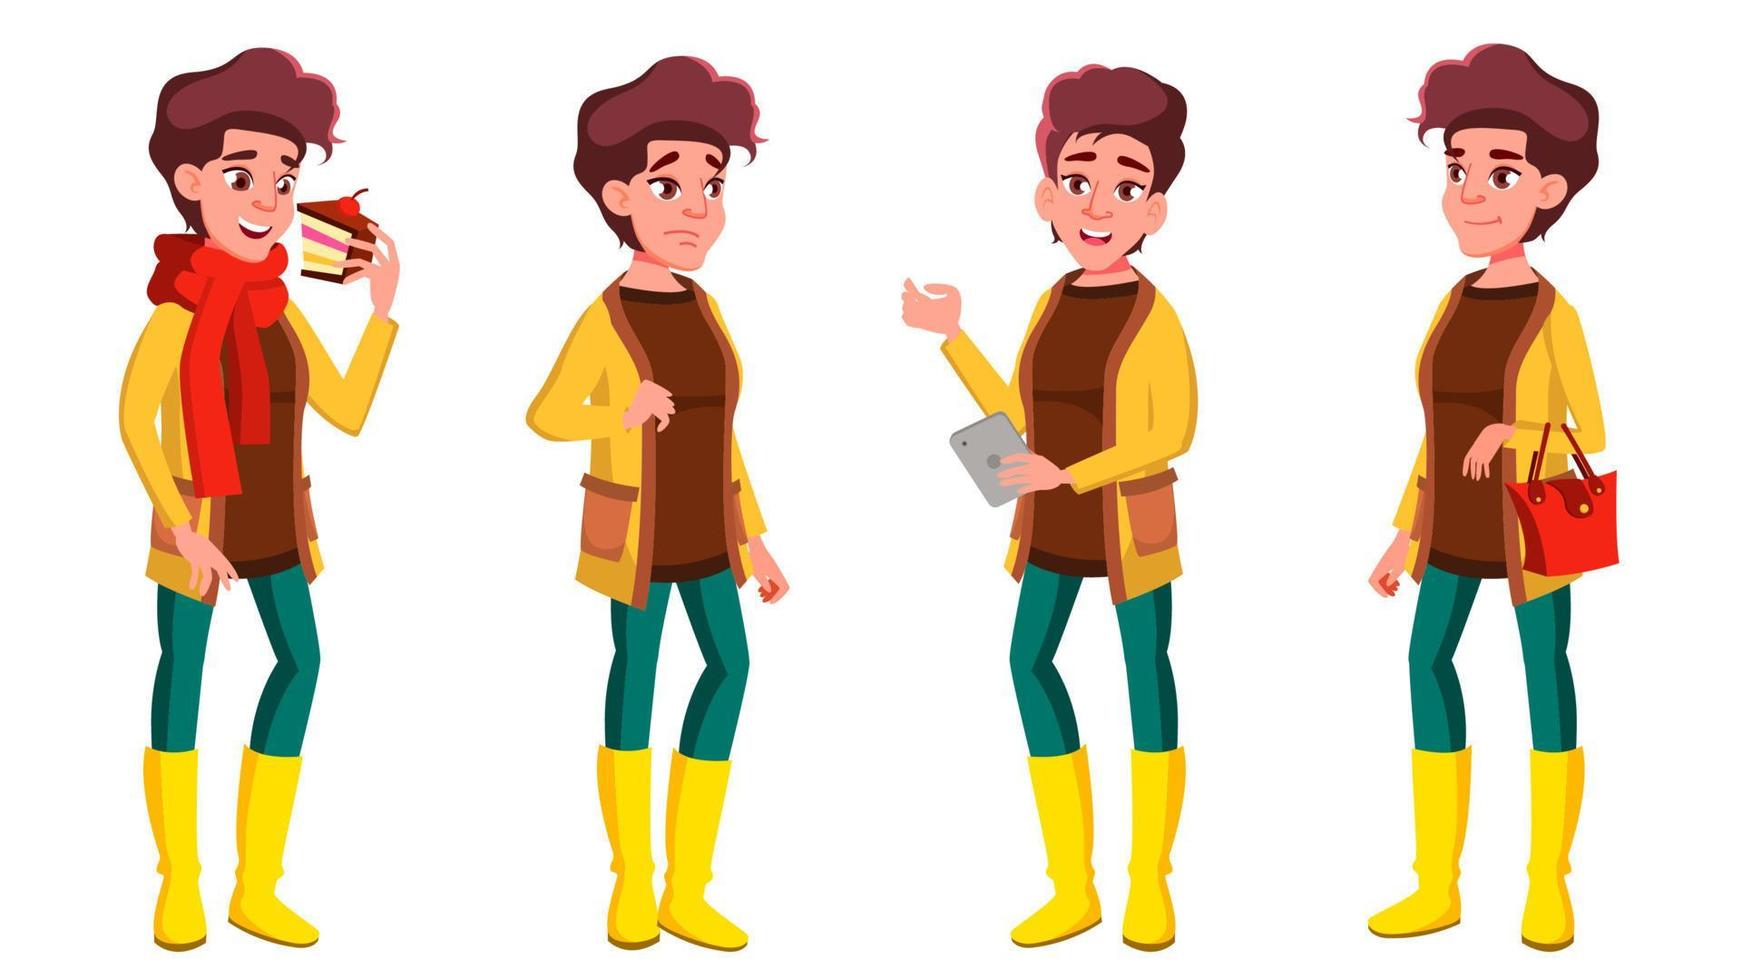 Teen Girl Poses Set Vector. Emotional, Pose. For Advertising, Placard, Print Design. Isolated Cartoon Illustration vector